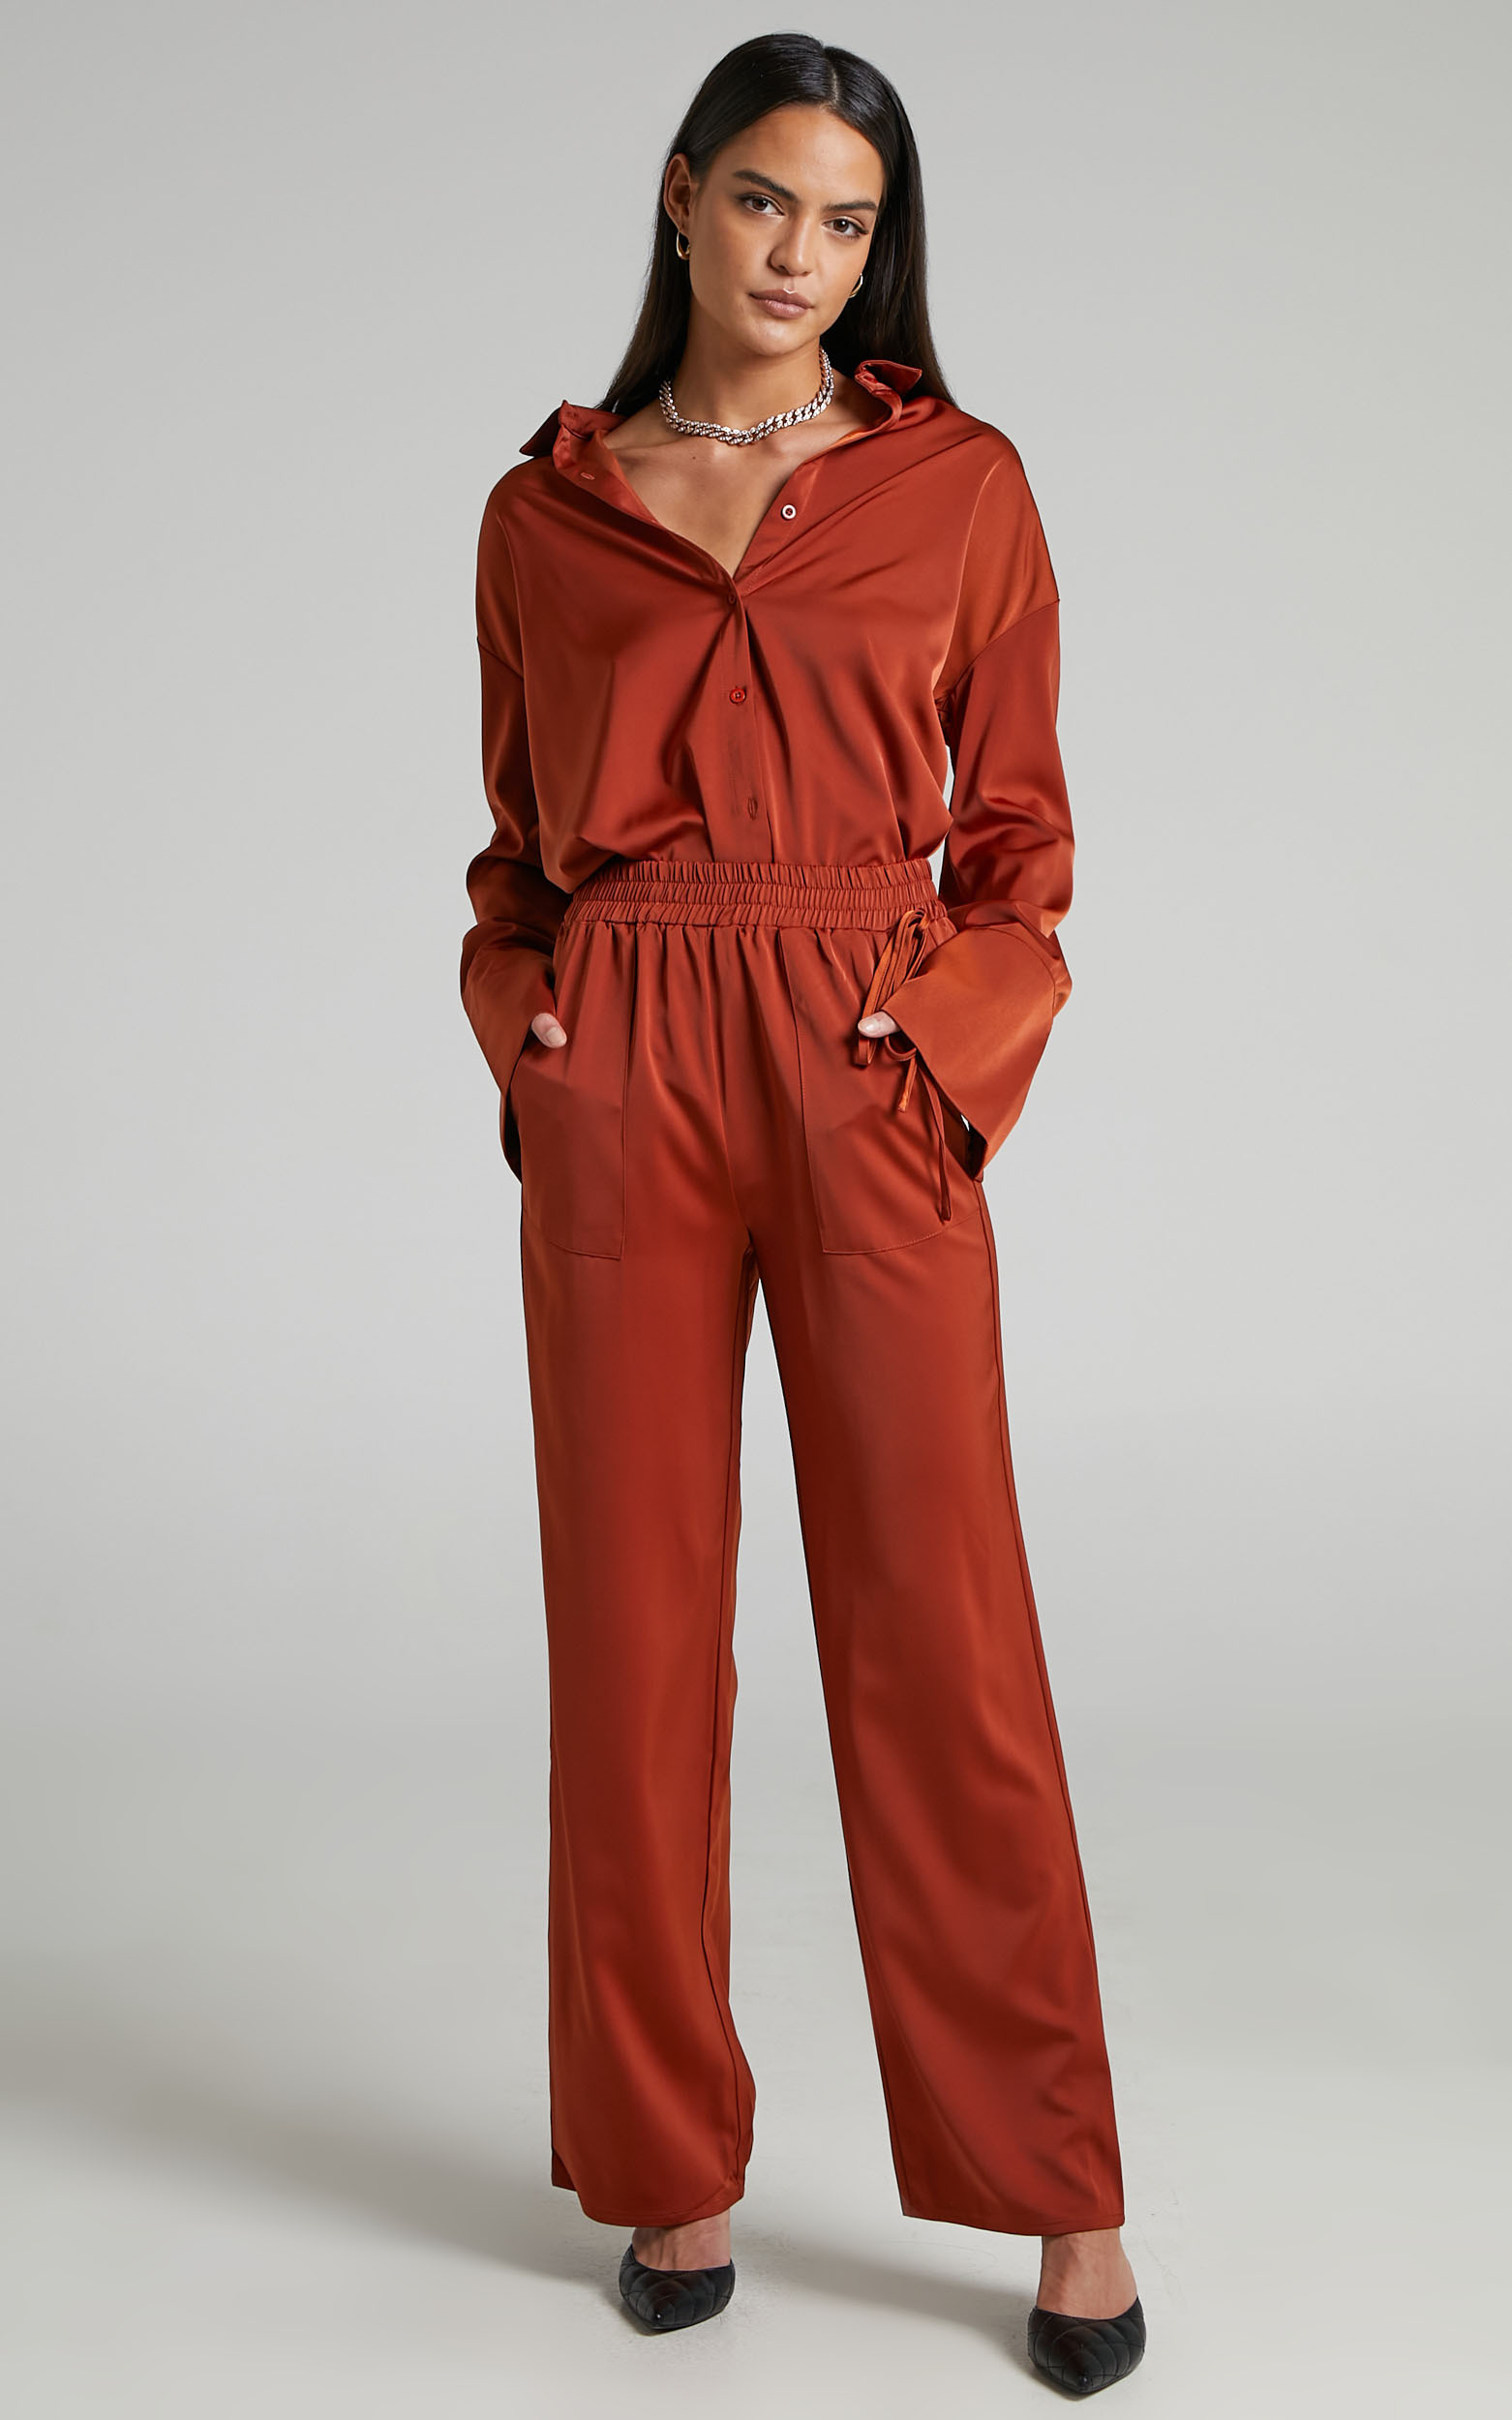 4th & Reckless - Joline Trouser in Rust - L, BRN1, hi-res image number null